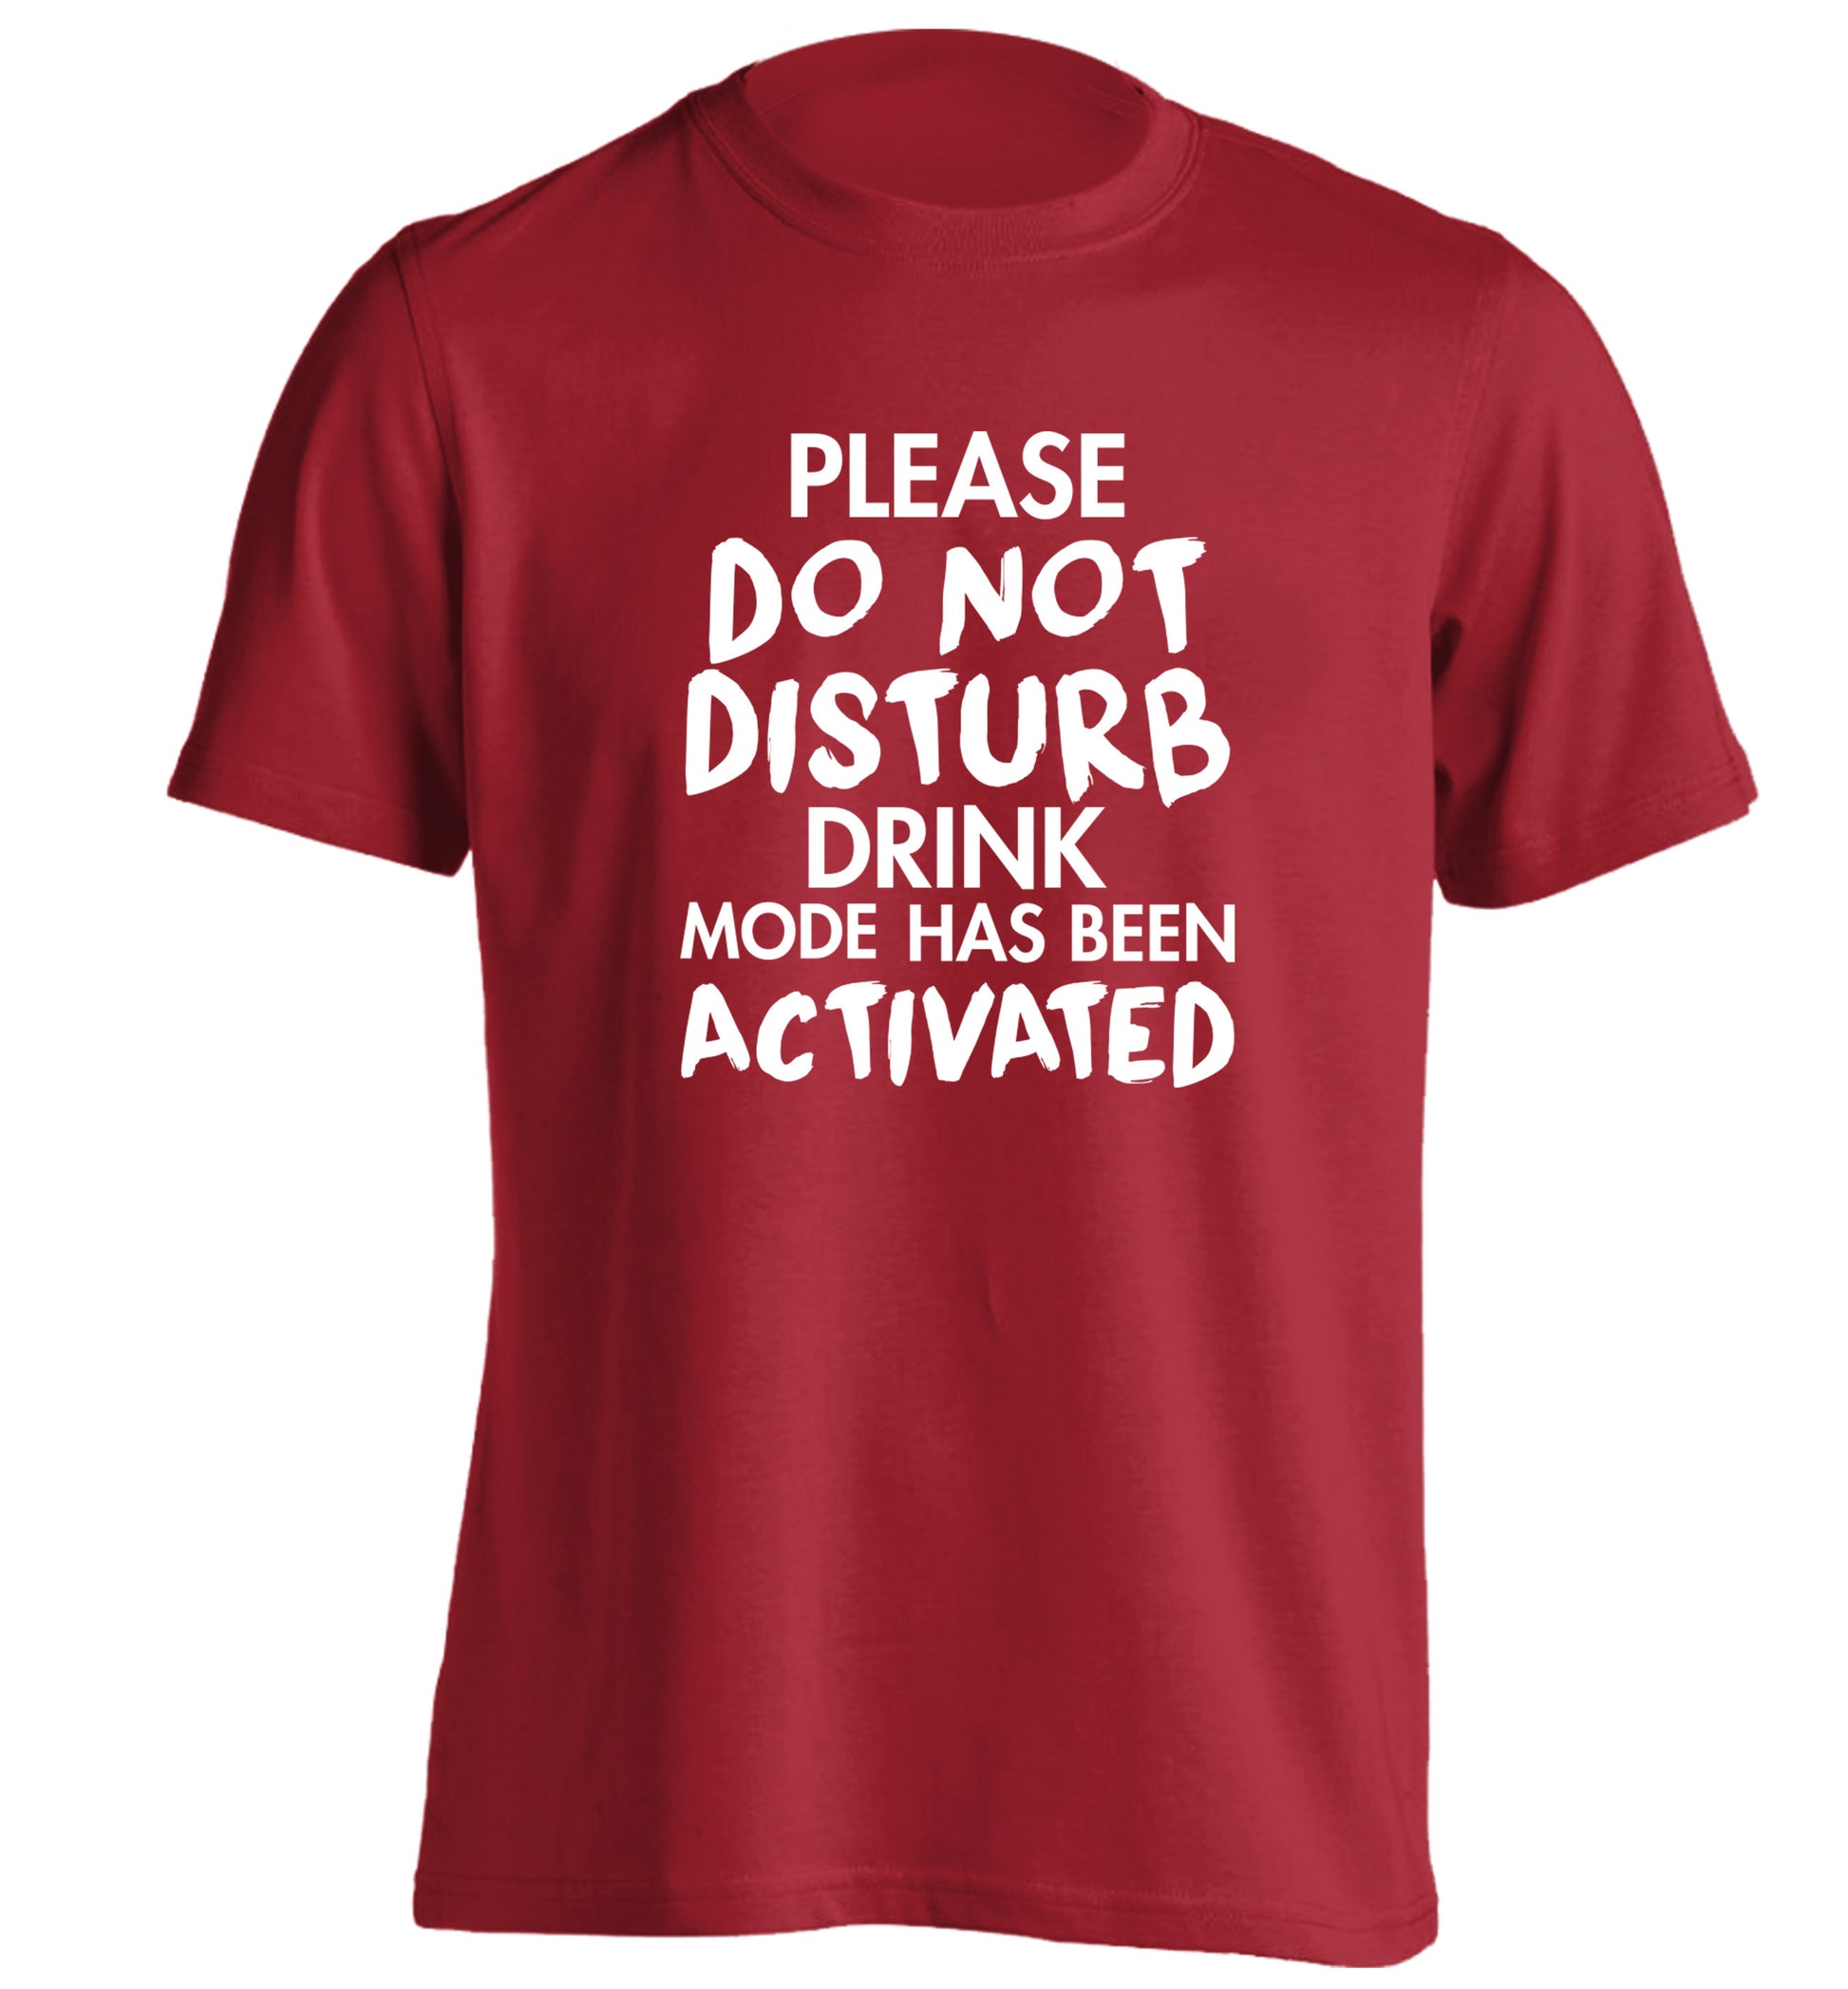 Please do not disturb drink mode has been activated adults unisex red Tshirt 2XL